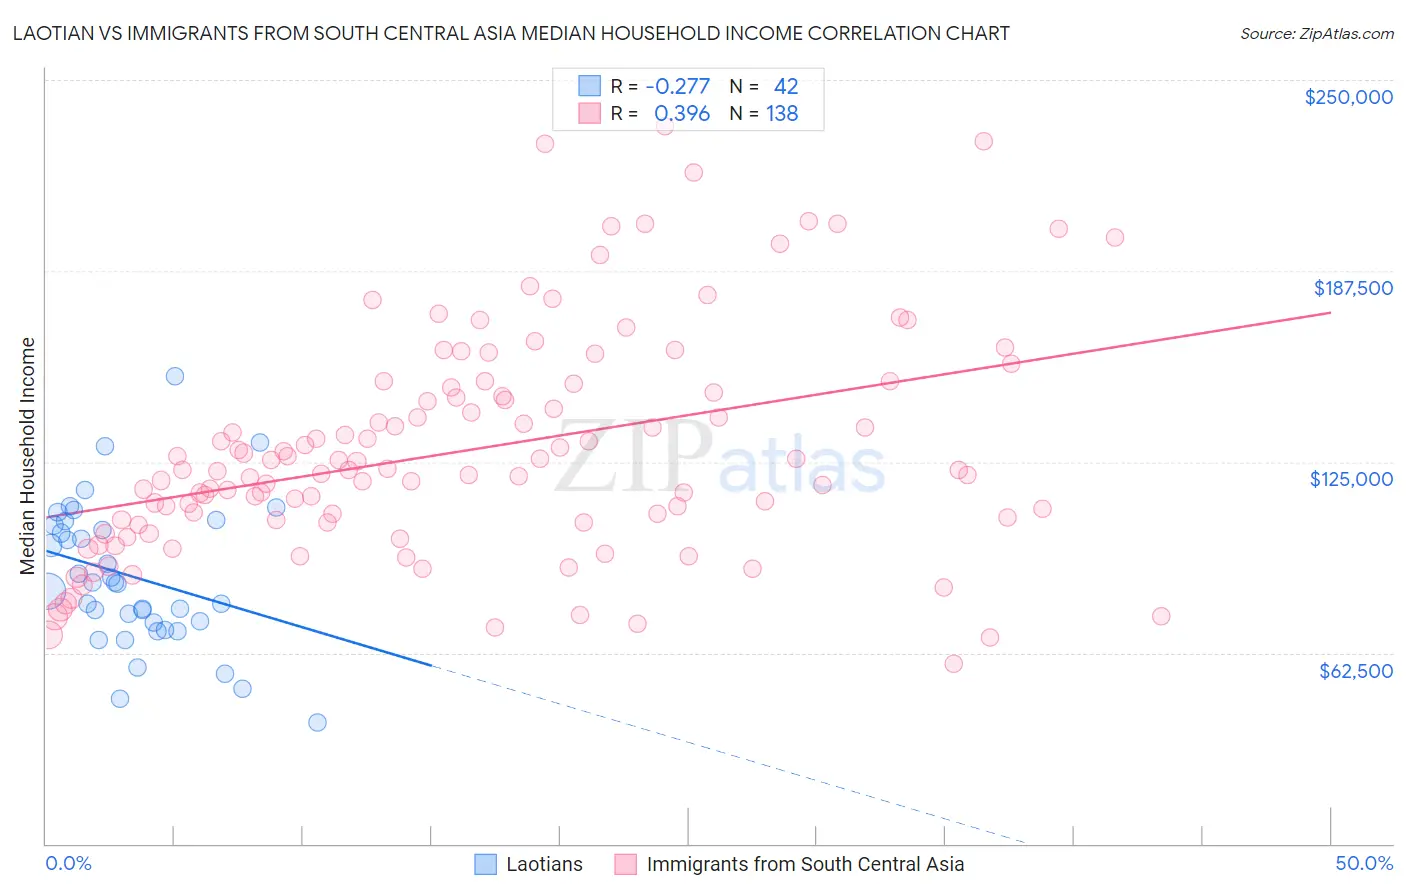 Laotian vs Immigrants from South Central Asia Median Household Income